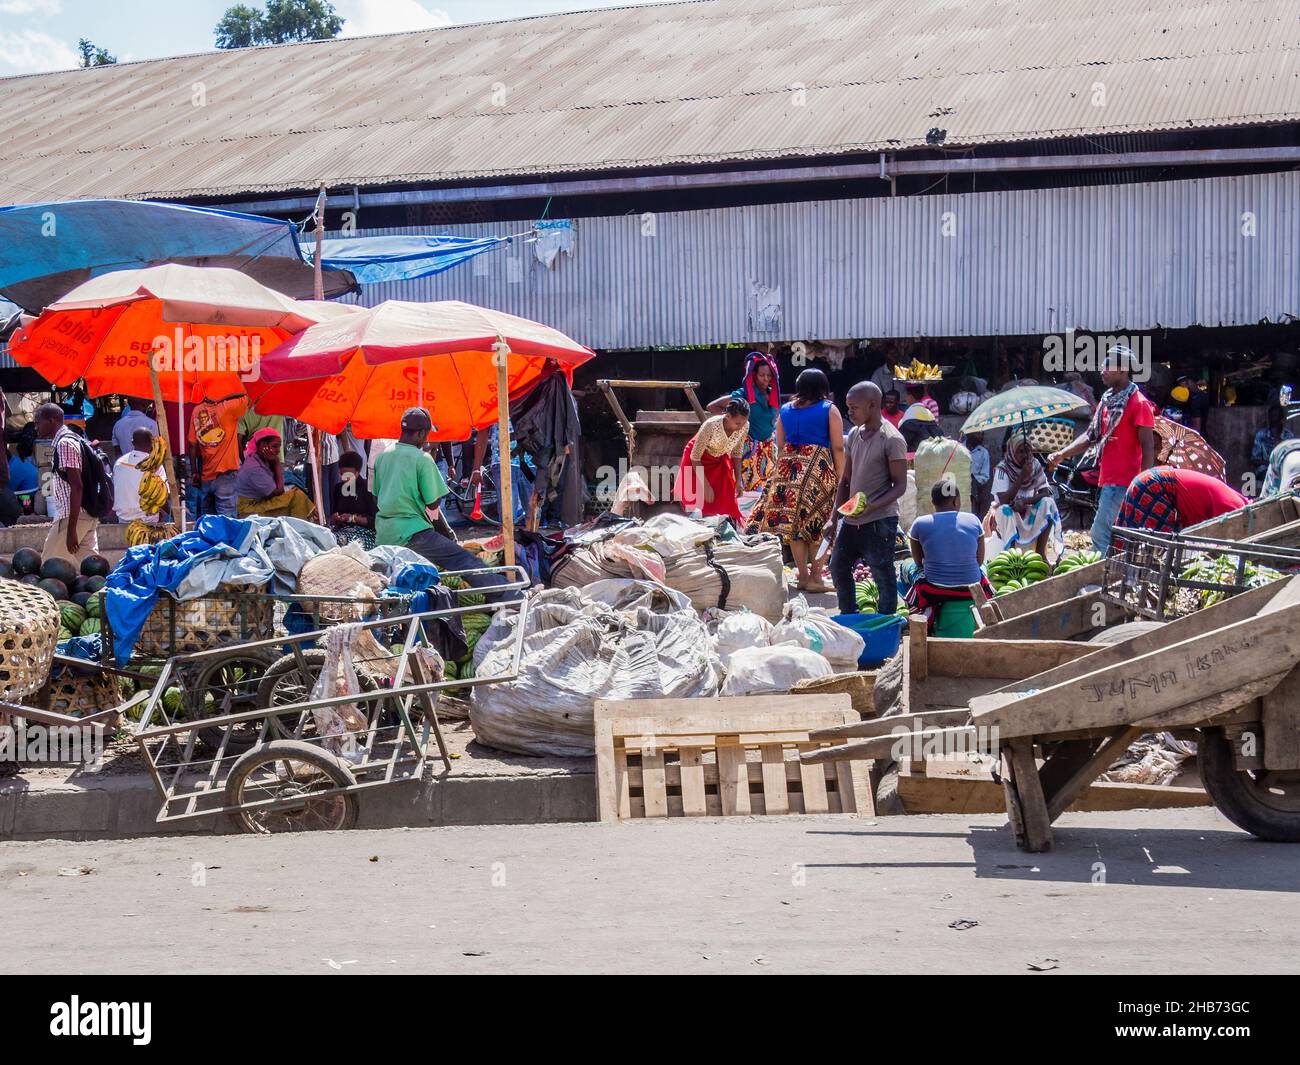 ARUSHA, TANZANIA - MARCH 16, 2017: Vendors and shoppers at a farmer's market along the highway in Arusha, Tanzania Stock Photo